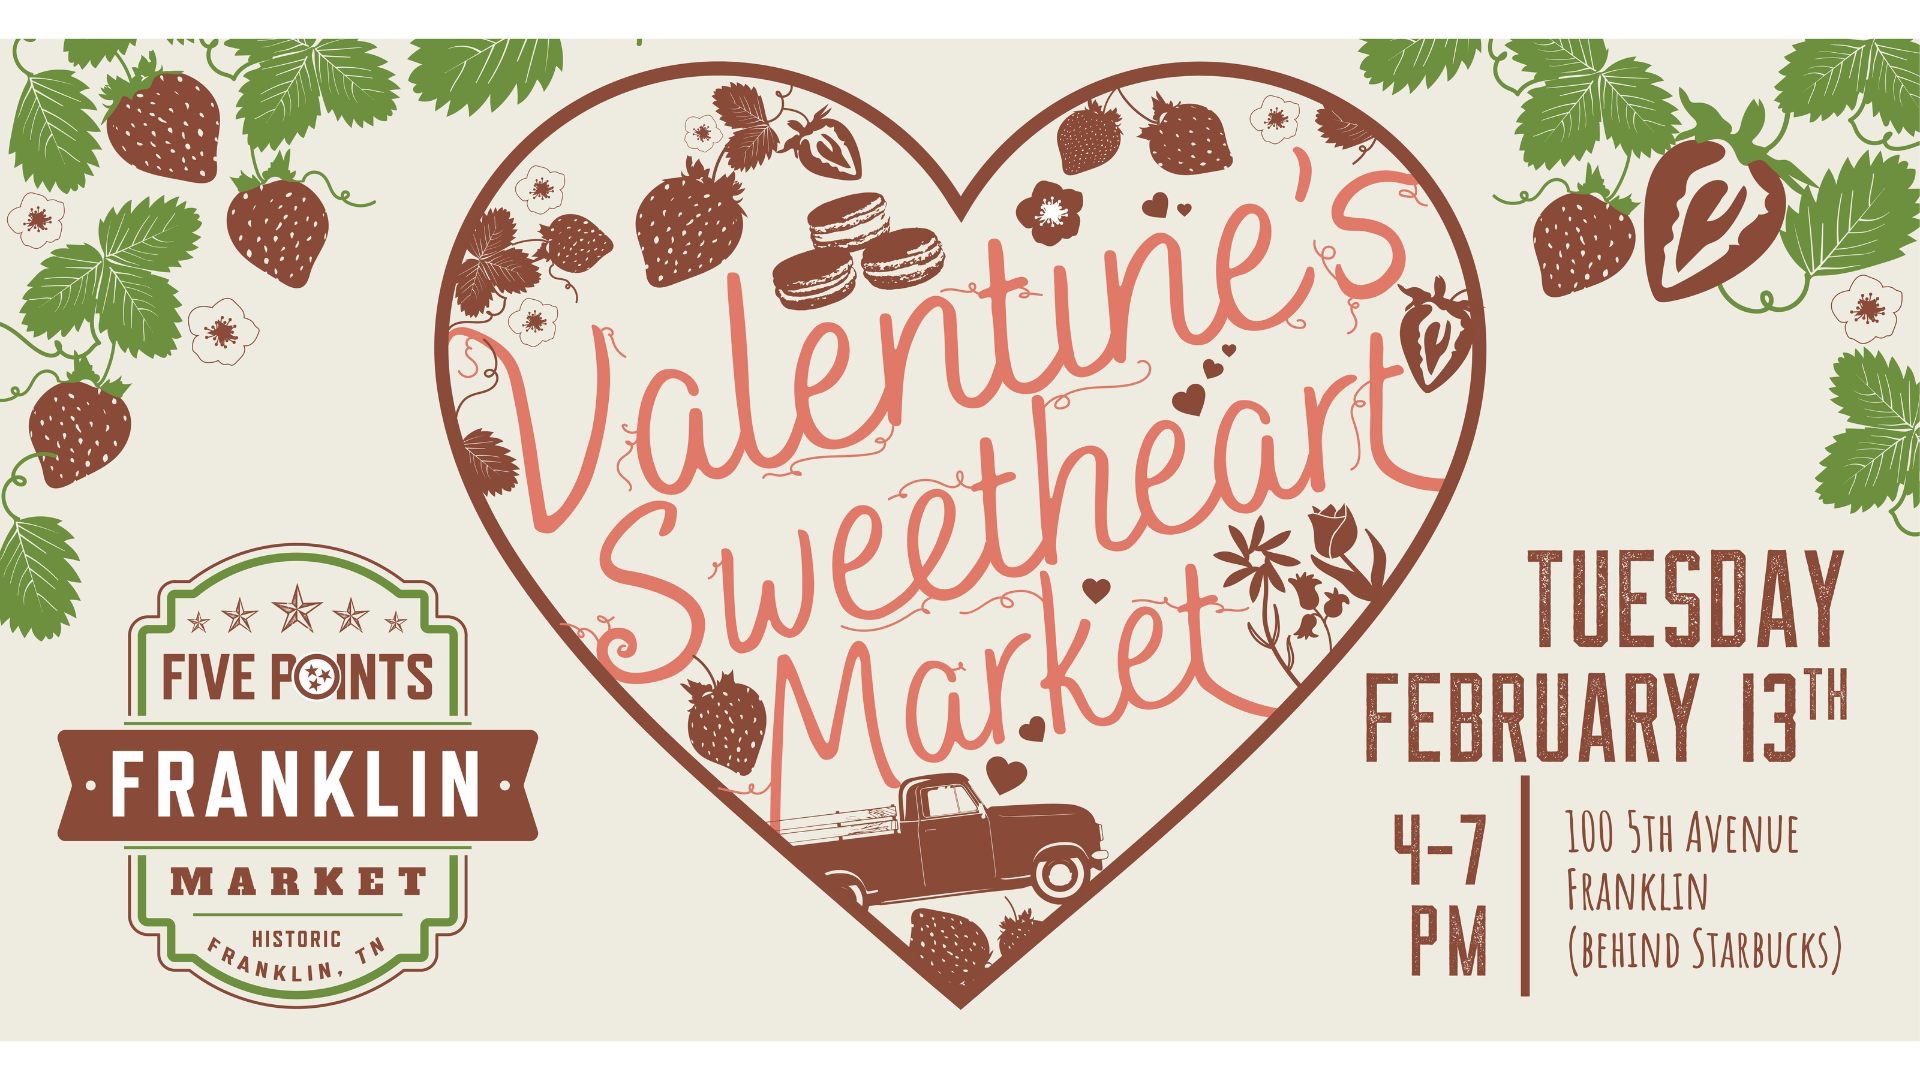 Valentine’s Sweetheart Market – Five Points Franklin Market in downtown Franklin, TN, February 13th from 4-7 PM.